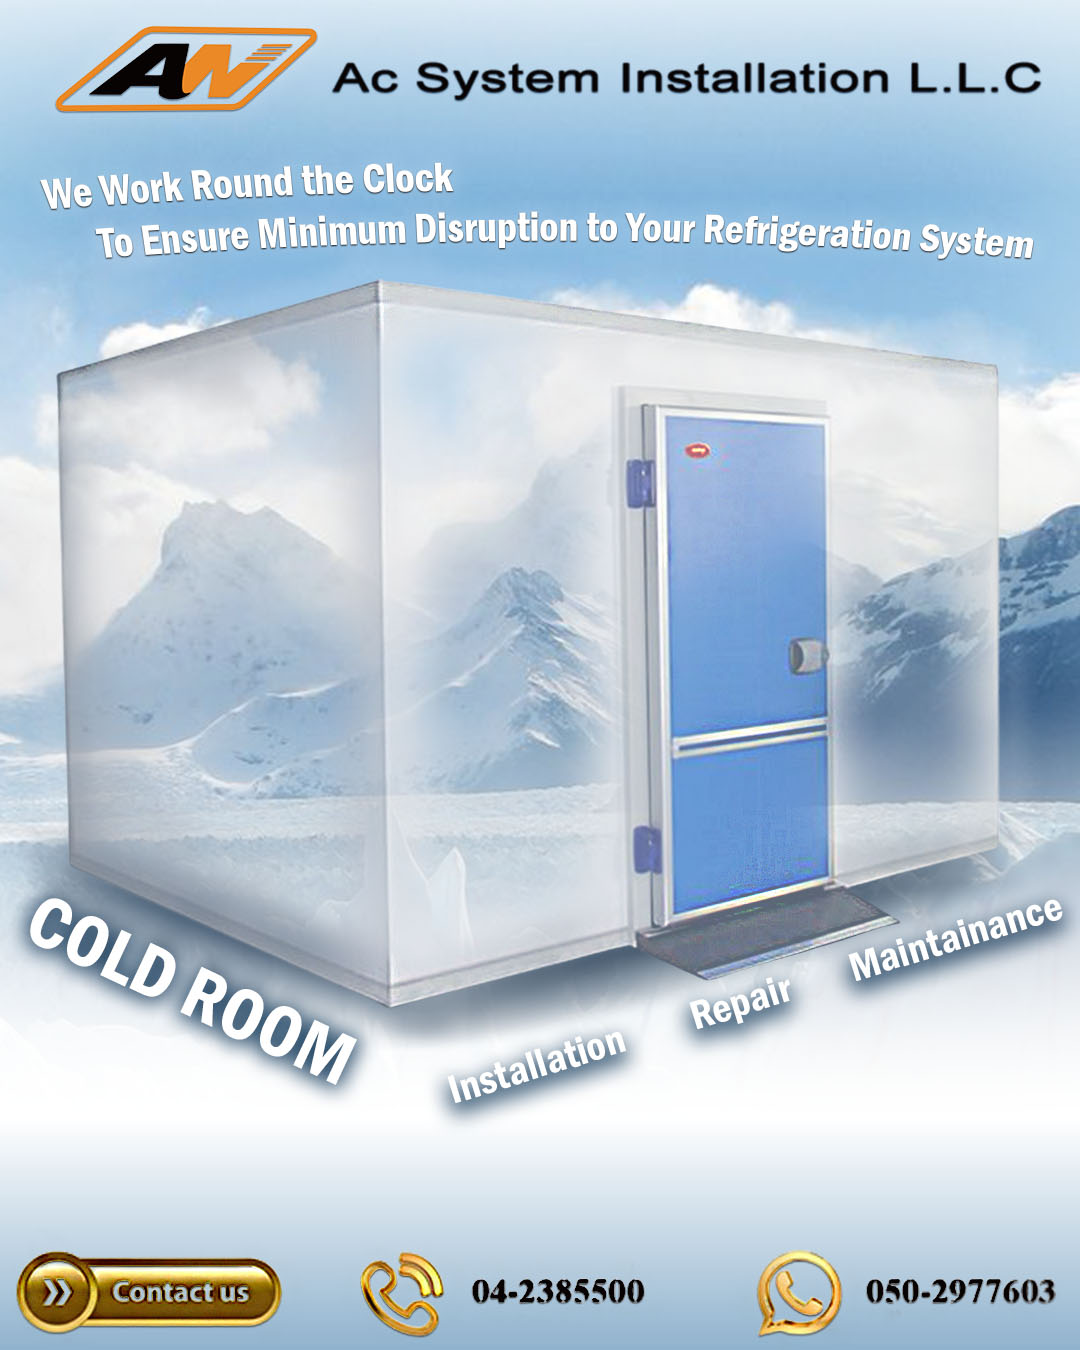 Cold Room Installation, Repair and Maintenance